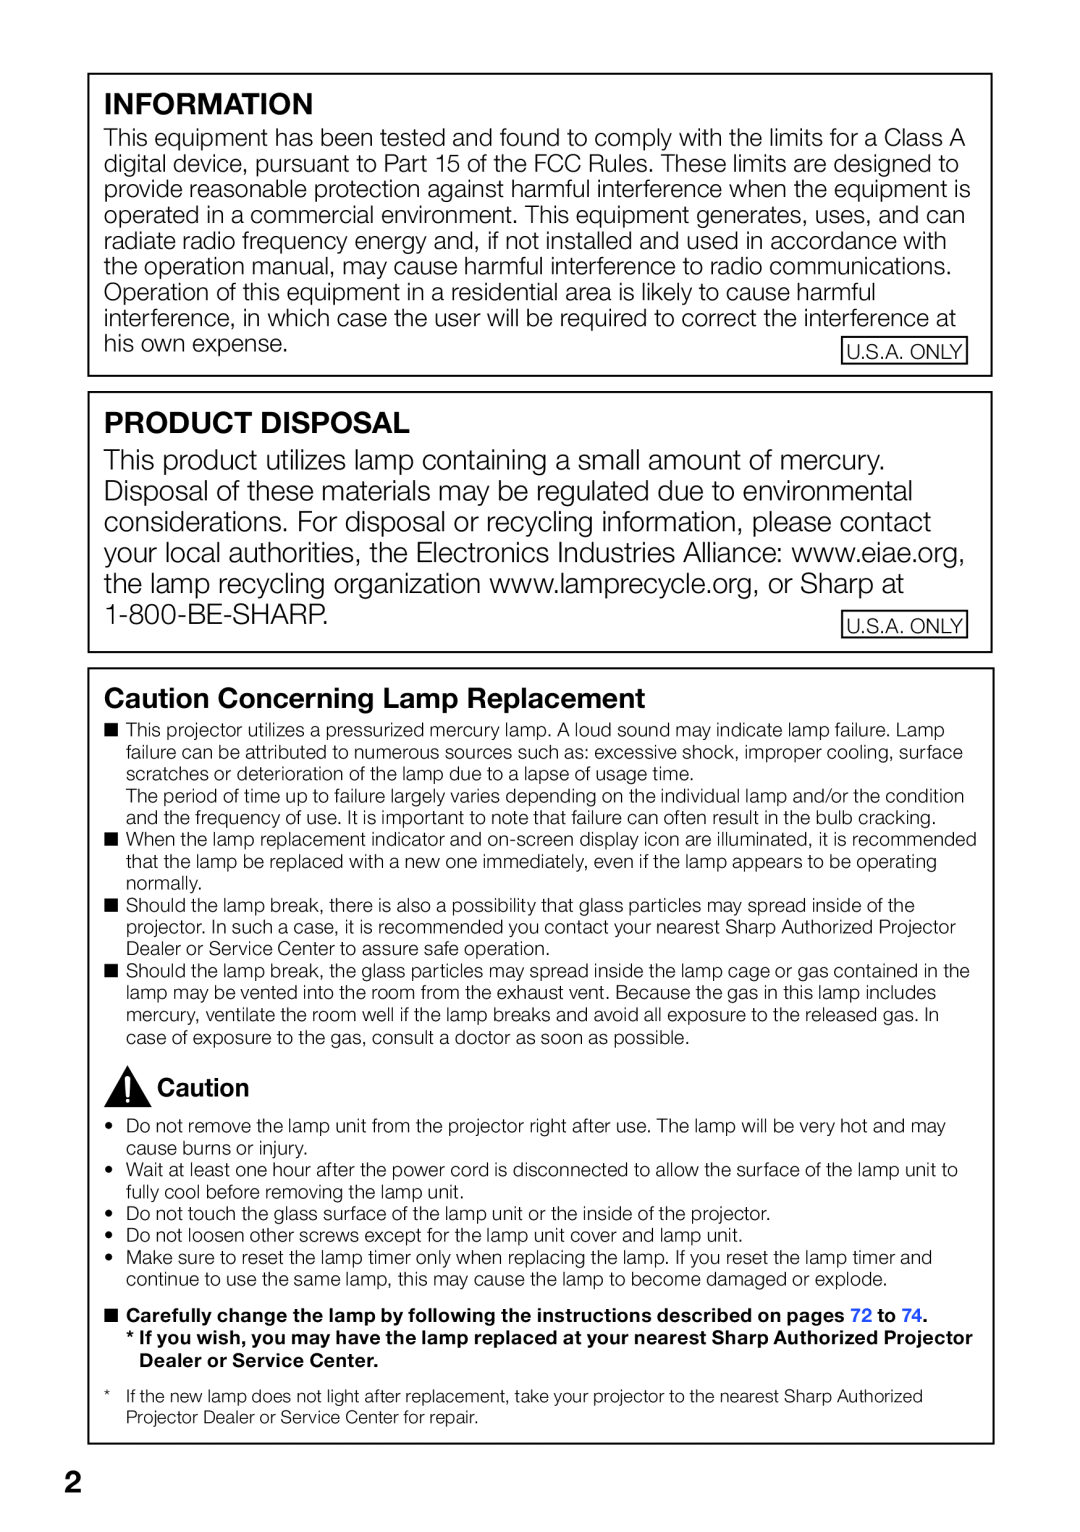 Sharp XG-SV200X, XG-SV100W appendix Information, Product Disposal, Caution Concerning Lamp Replacement 